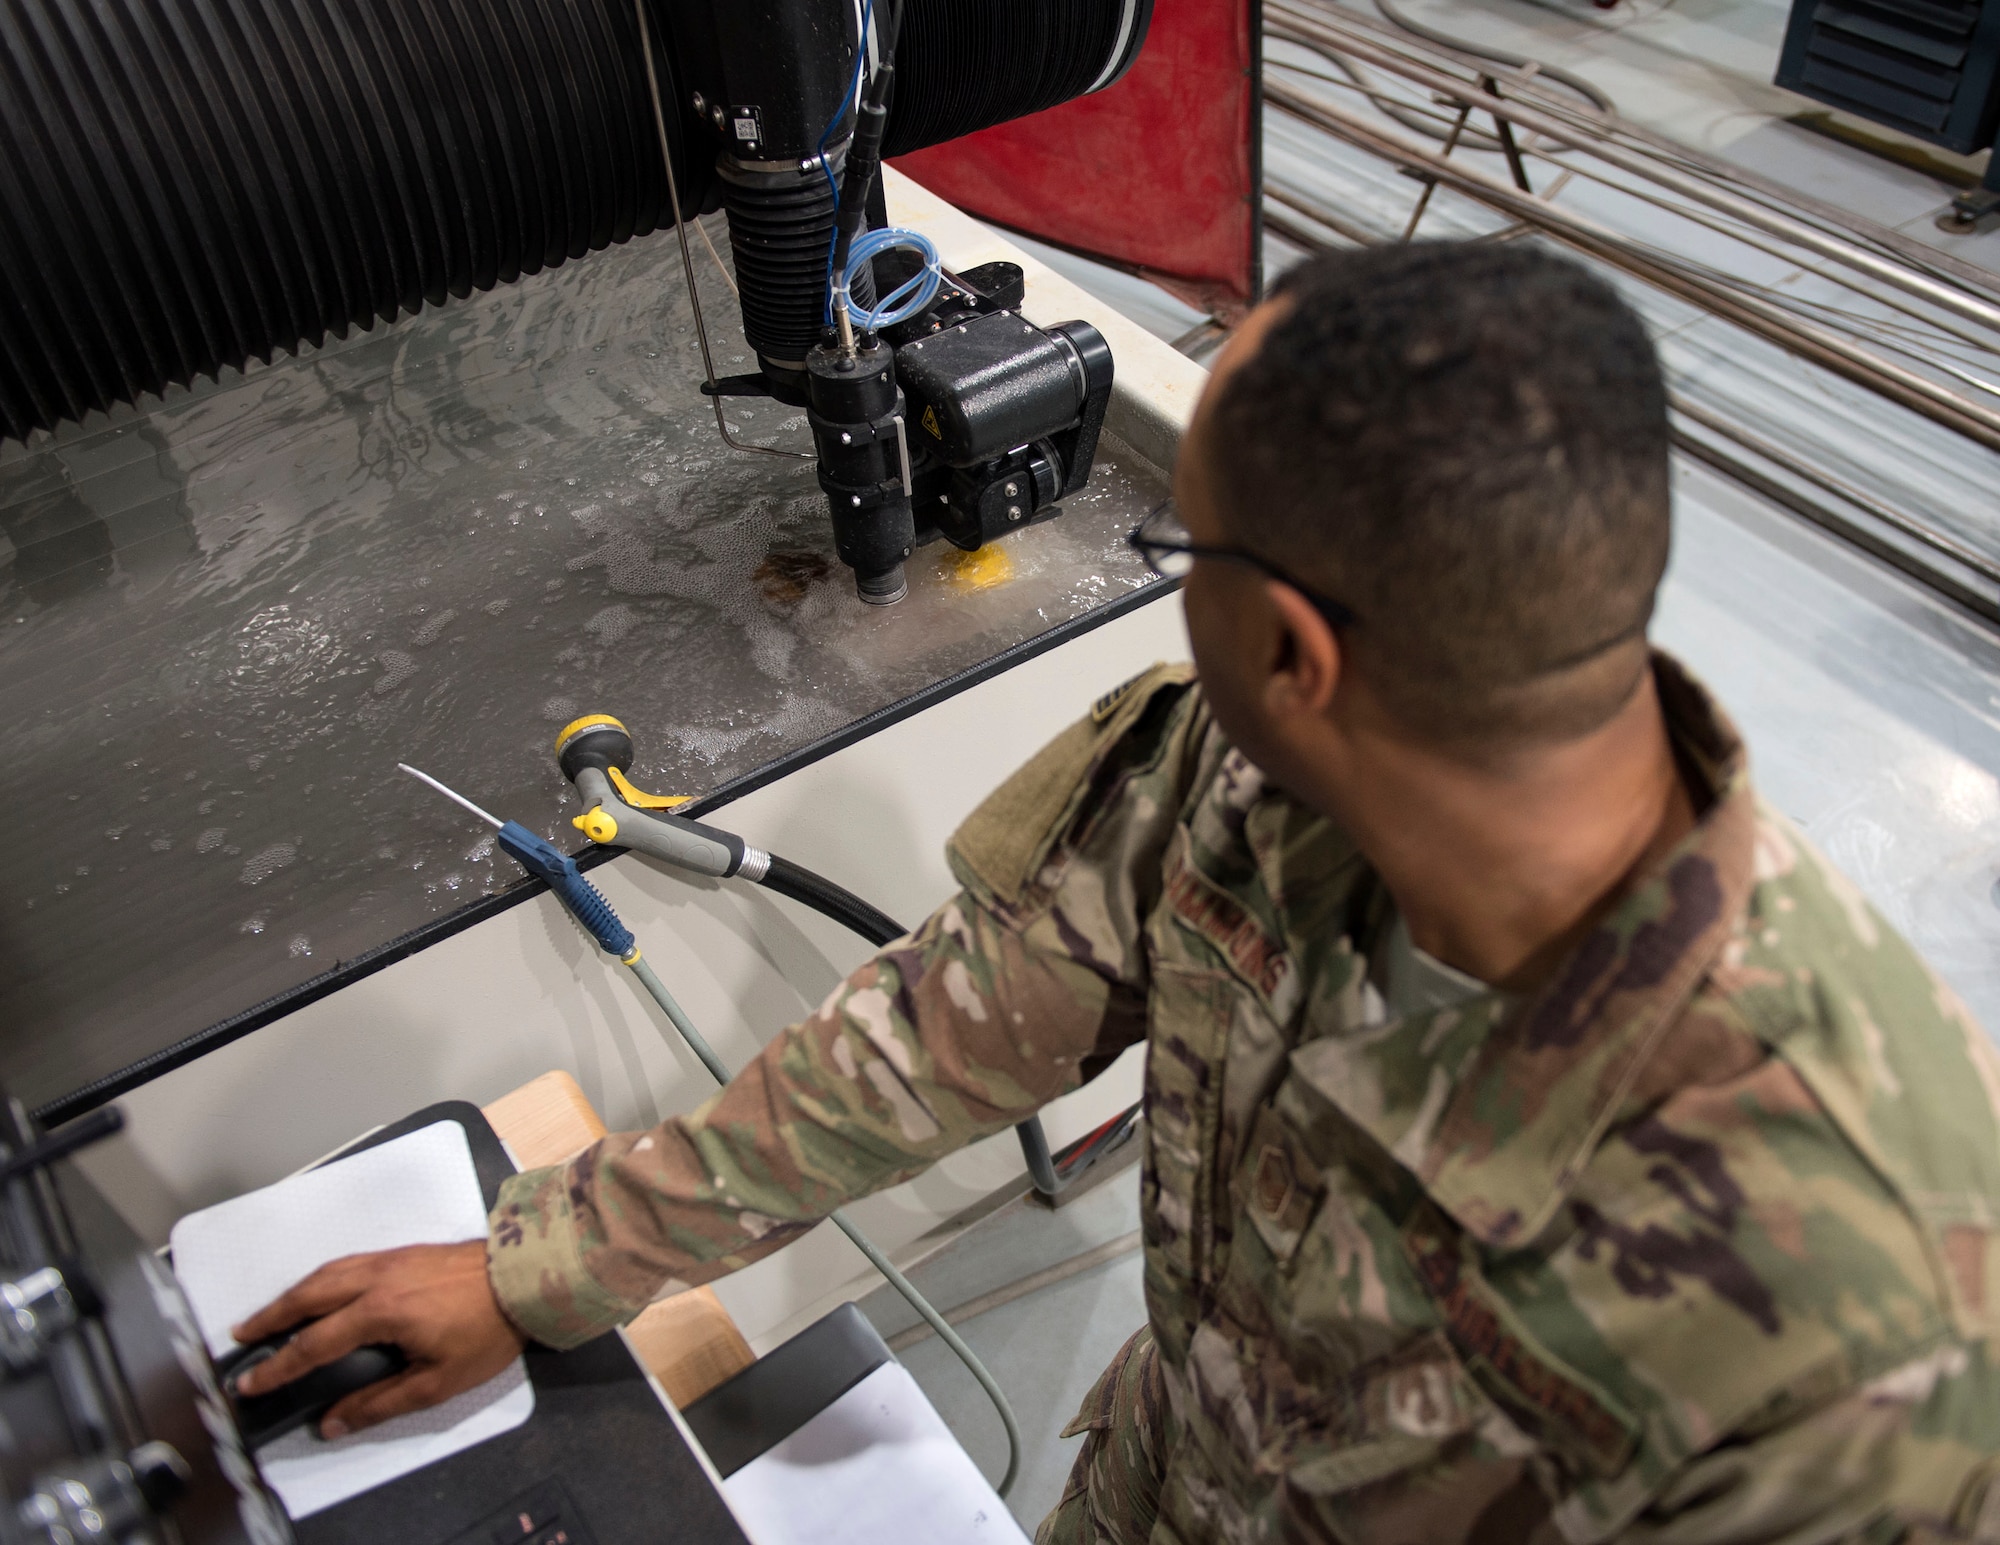 U.S. Air Force Master Sgt. Anwar Simmons, section chief with the 379th Expeditionary Maintenance Squadron, watches the abrasive waterjet cutting machine at Al Udeid Air Base, Qatar, May 30, 2017. The abrasive waterjet cutting machine allows the airmen to create a wide range of aircraft parts or tools needed to complete the mission in an expedited and a cost effective manner. (U.S. Air Force photo by Tech. Sgt. Amy M. Lovgren)